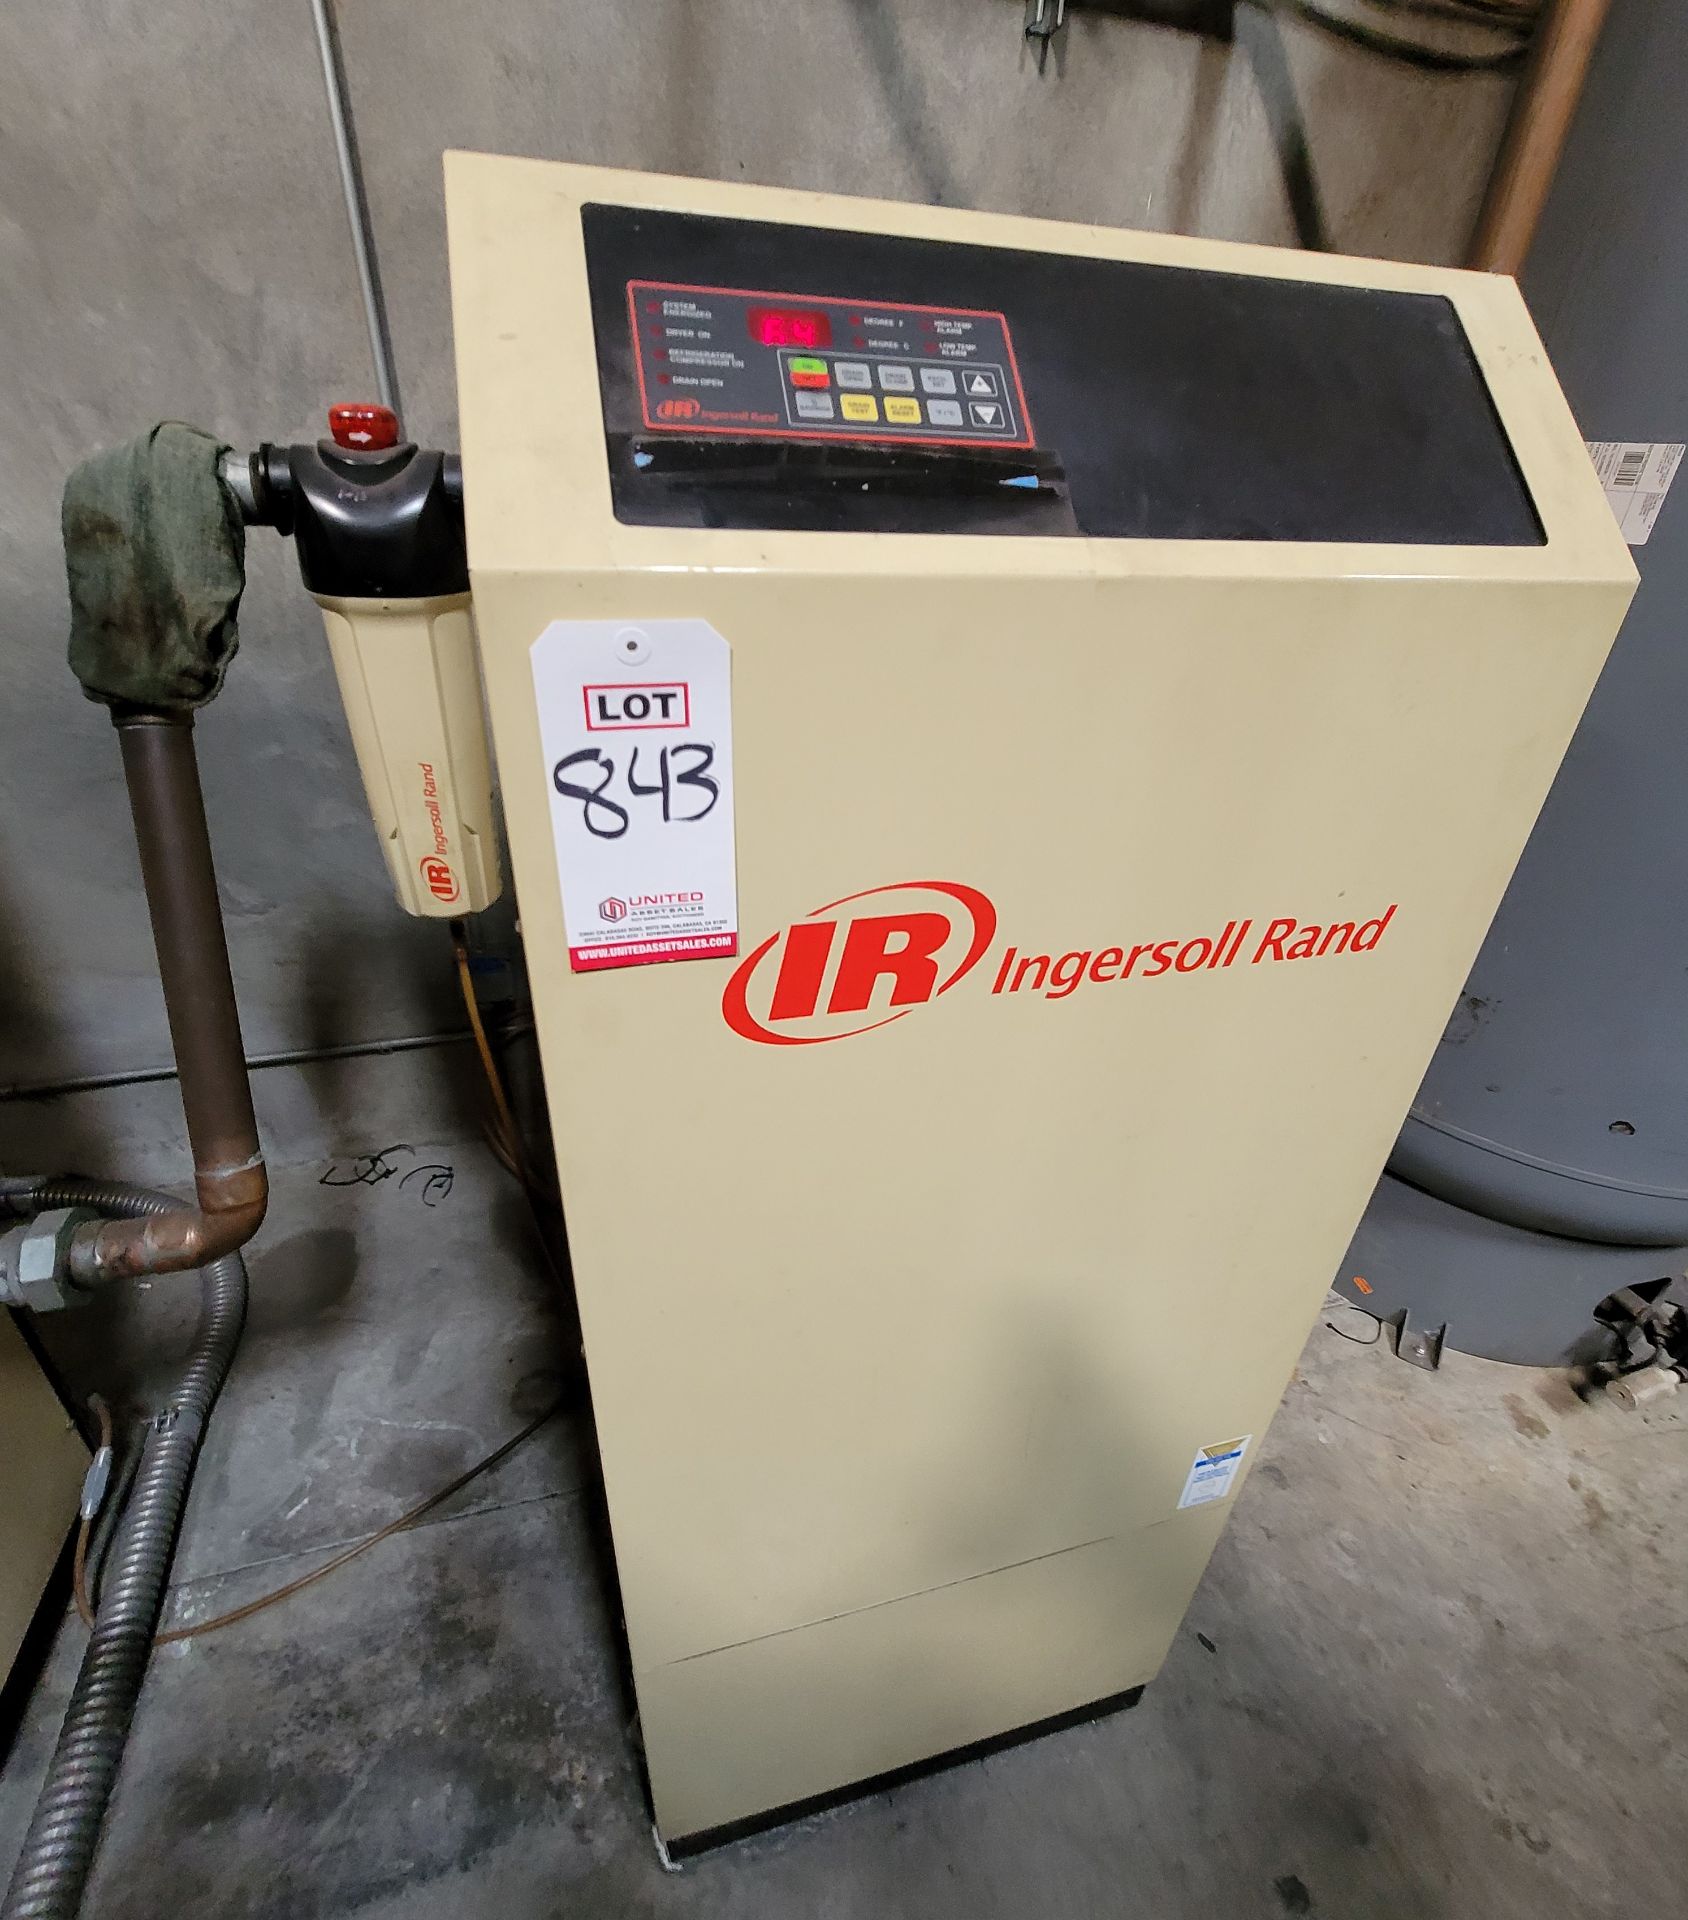 INGERSOLL-RAND REFRIGERATED AIR DRYER, MODEL NVC400A400, S/N 494564